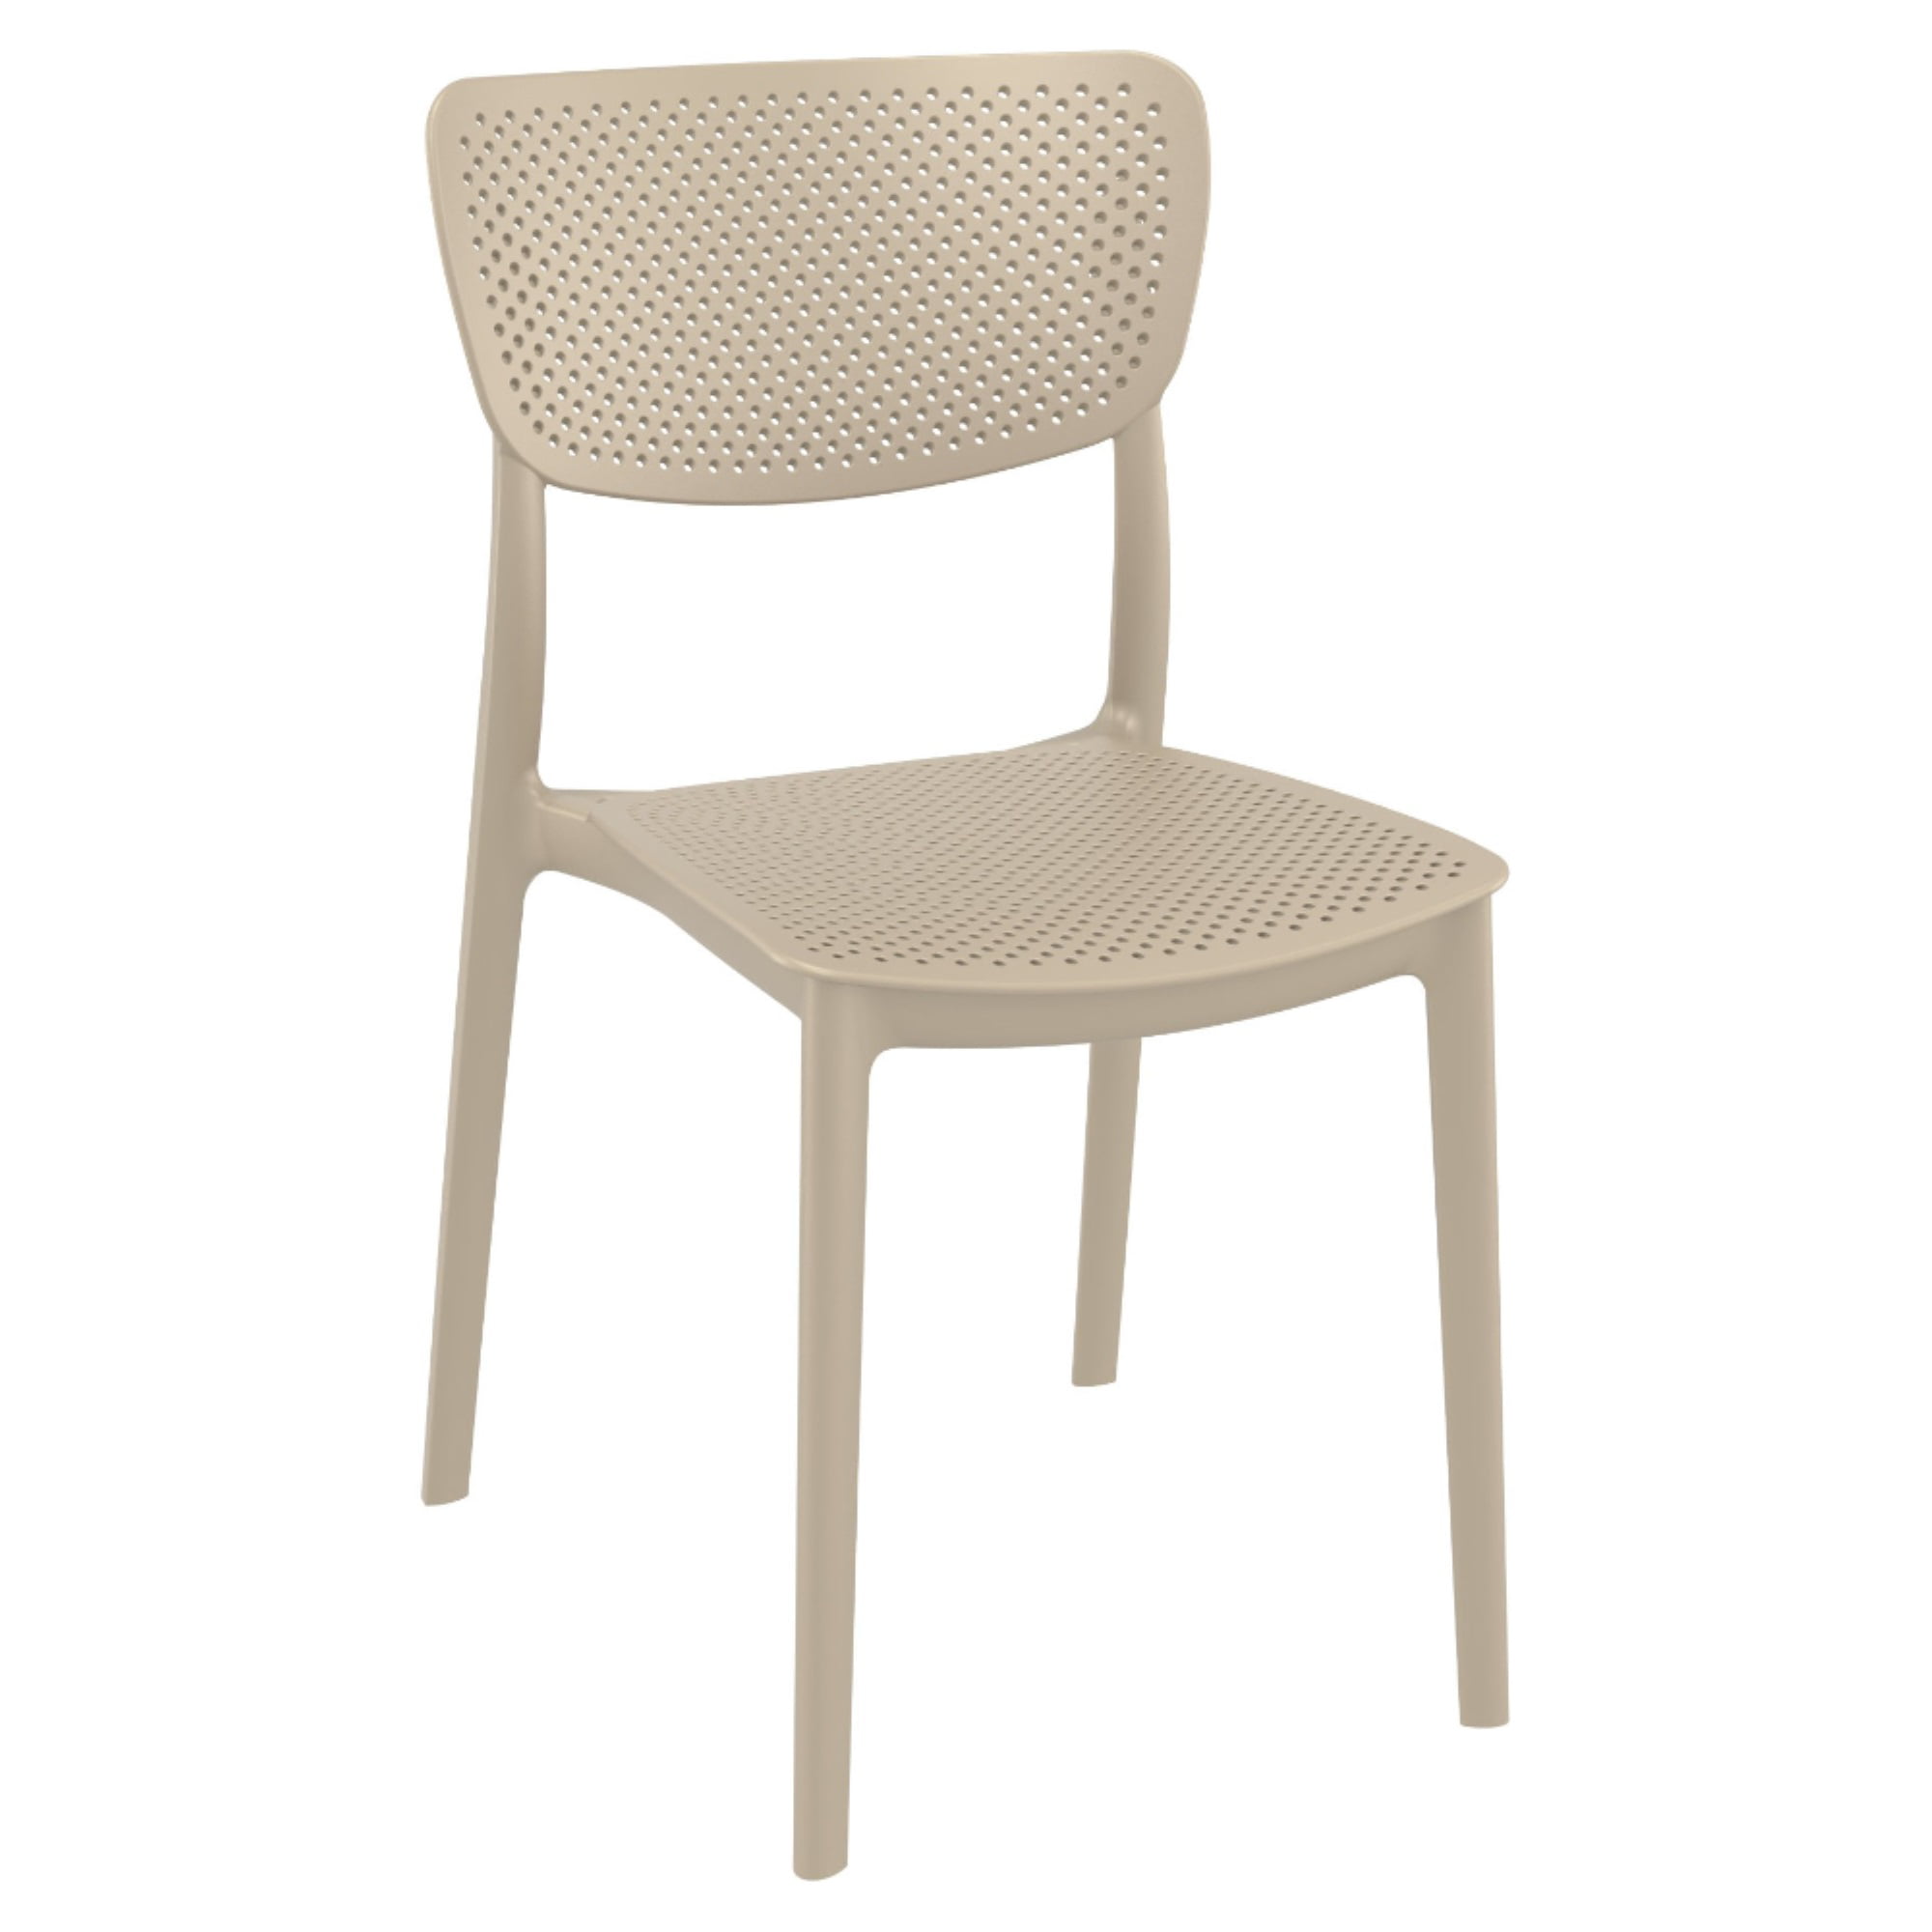 Isp129-dvr Lucy Outdoor Dining Chair - Taupe